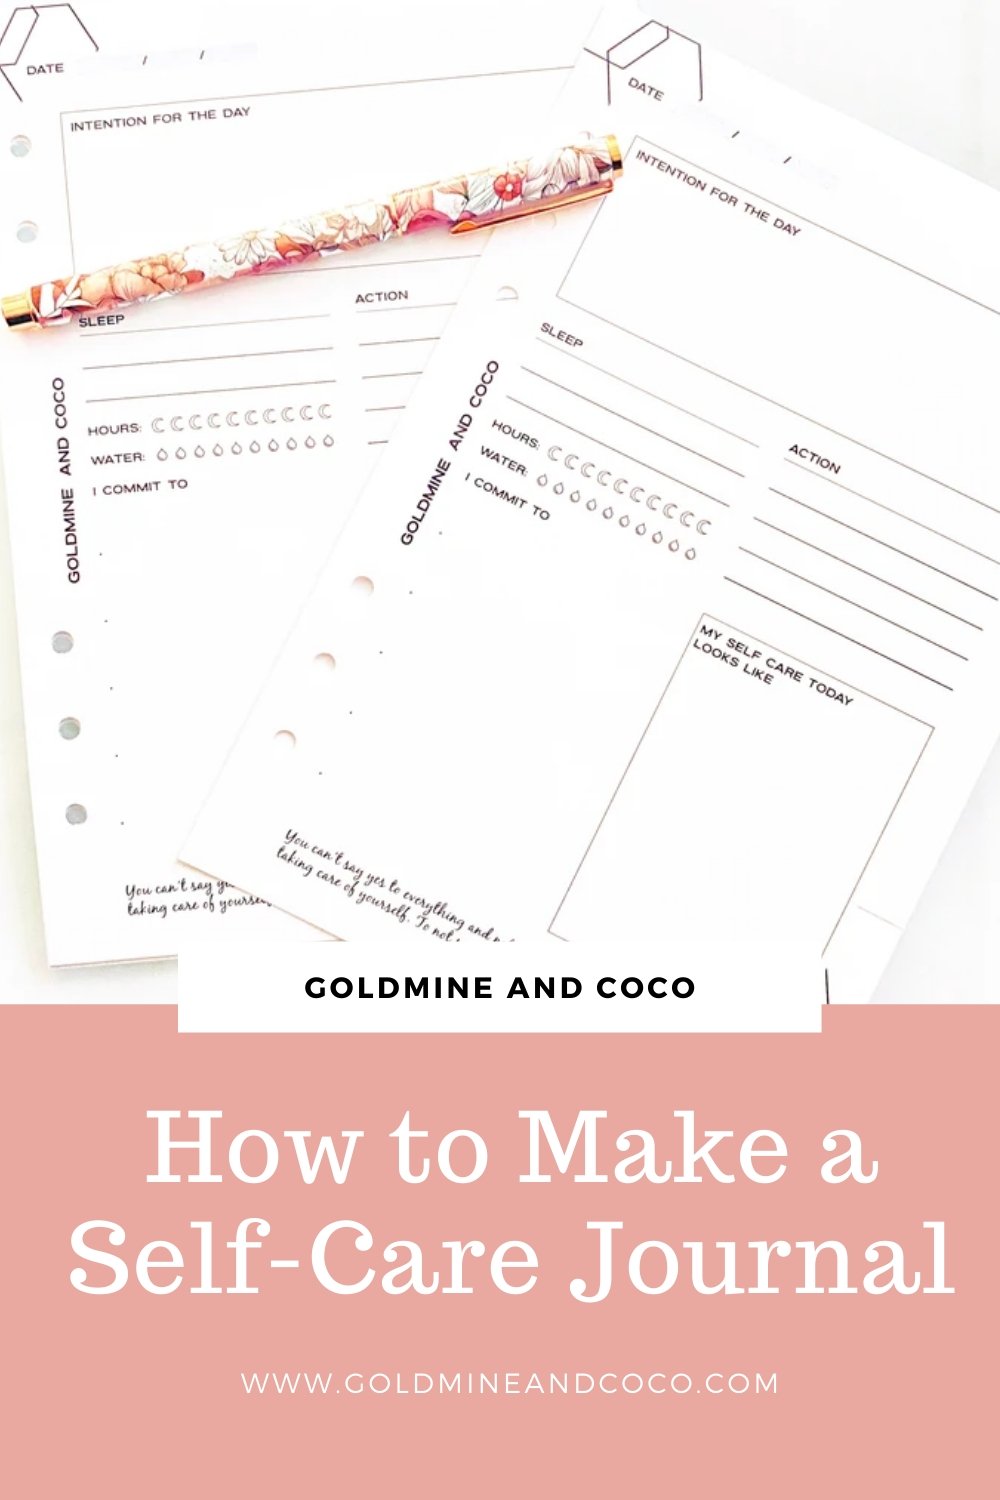 Here's How You Can Make A Self-Care Journal – Goldmine & Coco